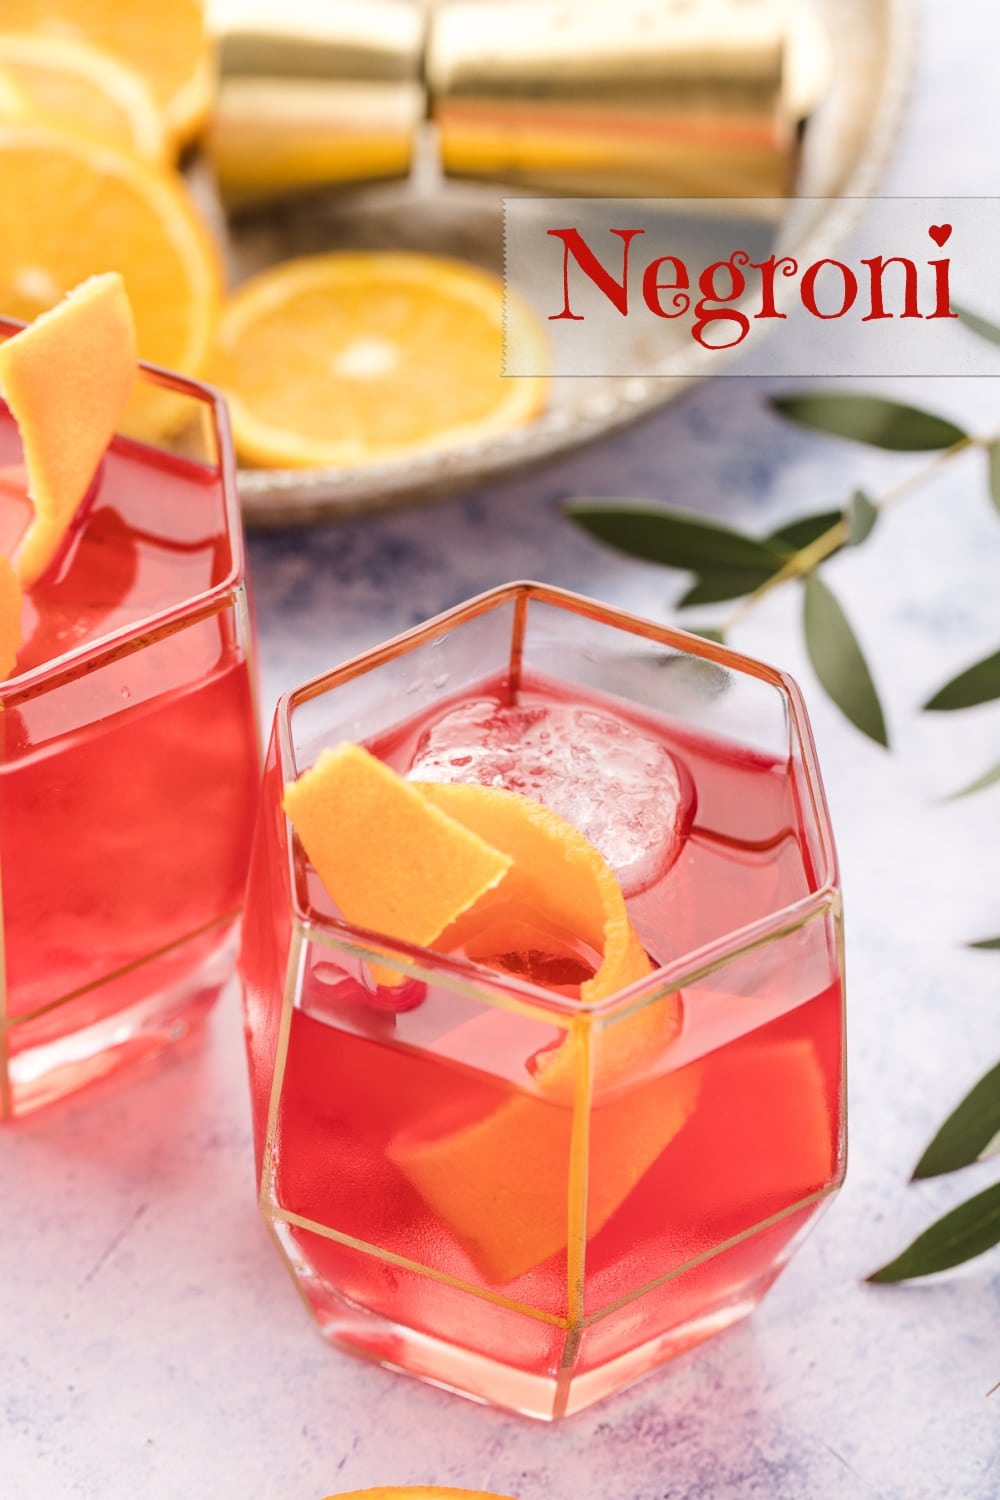 The Negroni cocktail, a complex, sophisticated, Italian aperitif that can be elusive to many new drinkers. While this classic cocktail is known for its equal ratios of alcohol, my Negroni is more gin-forward, which keeps the bitterness of the Campari in check.  via @cmpollak1